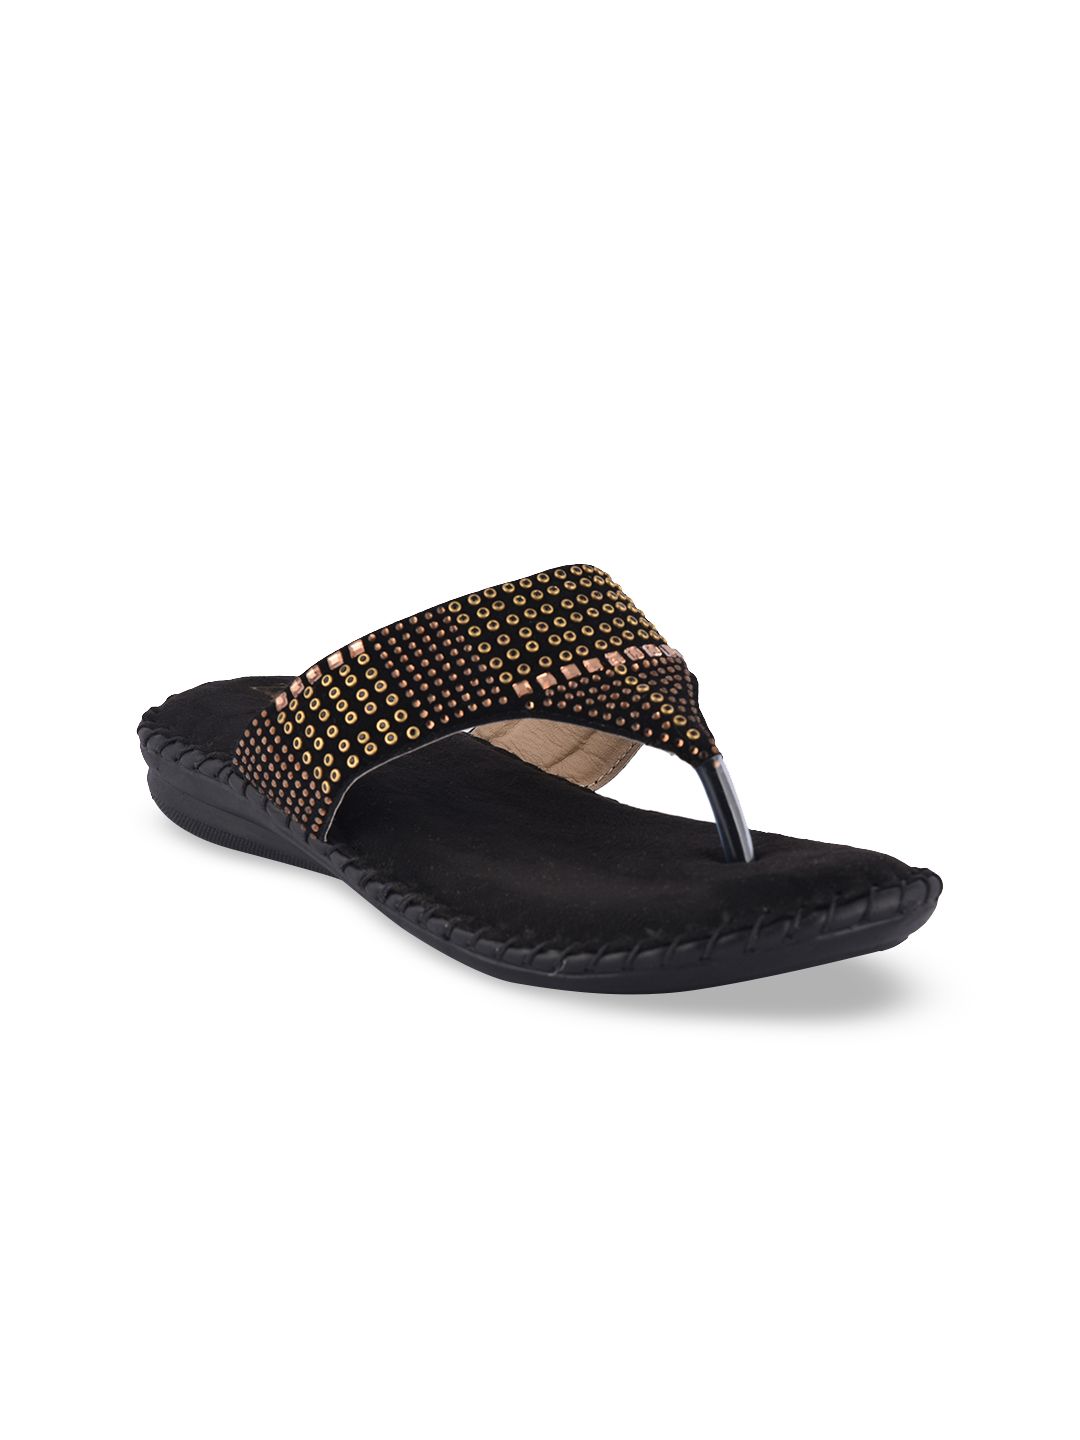 ZAPATOZ Women Black Embellished Suede Open Toe Flats Price in India